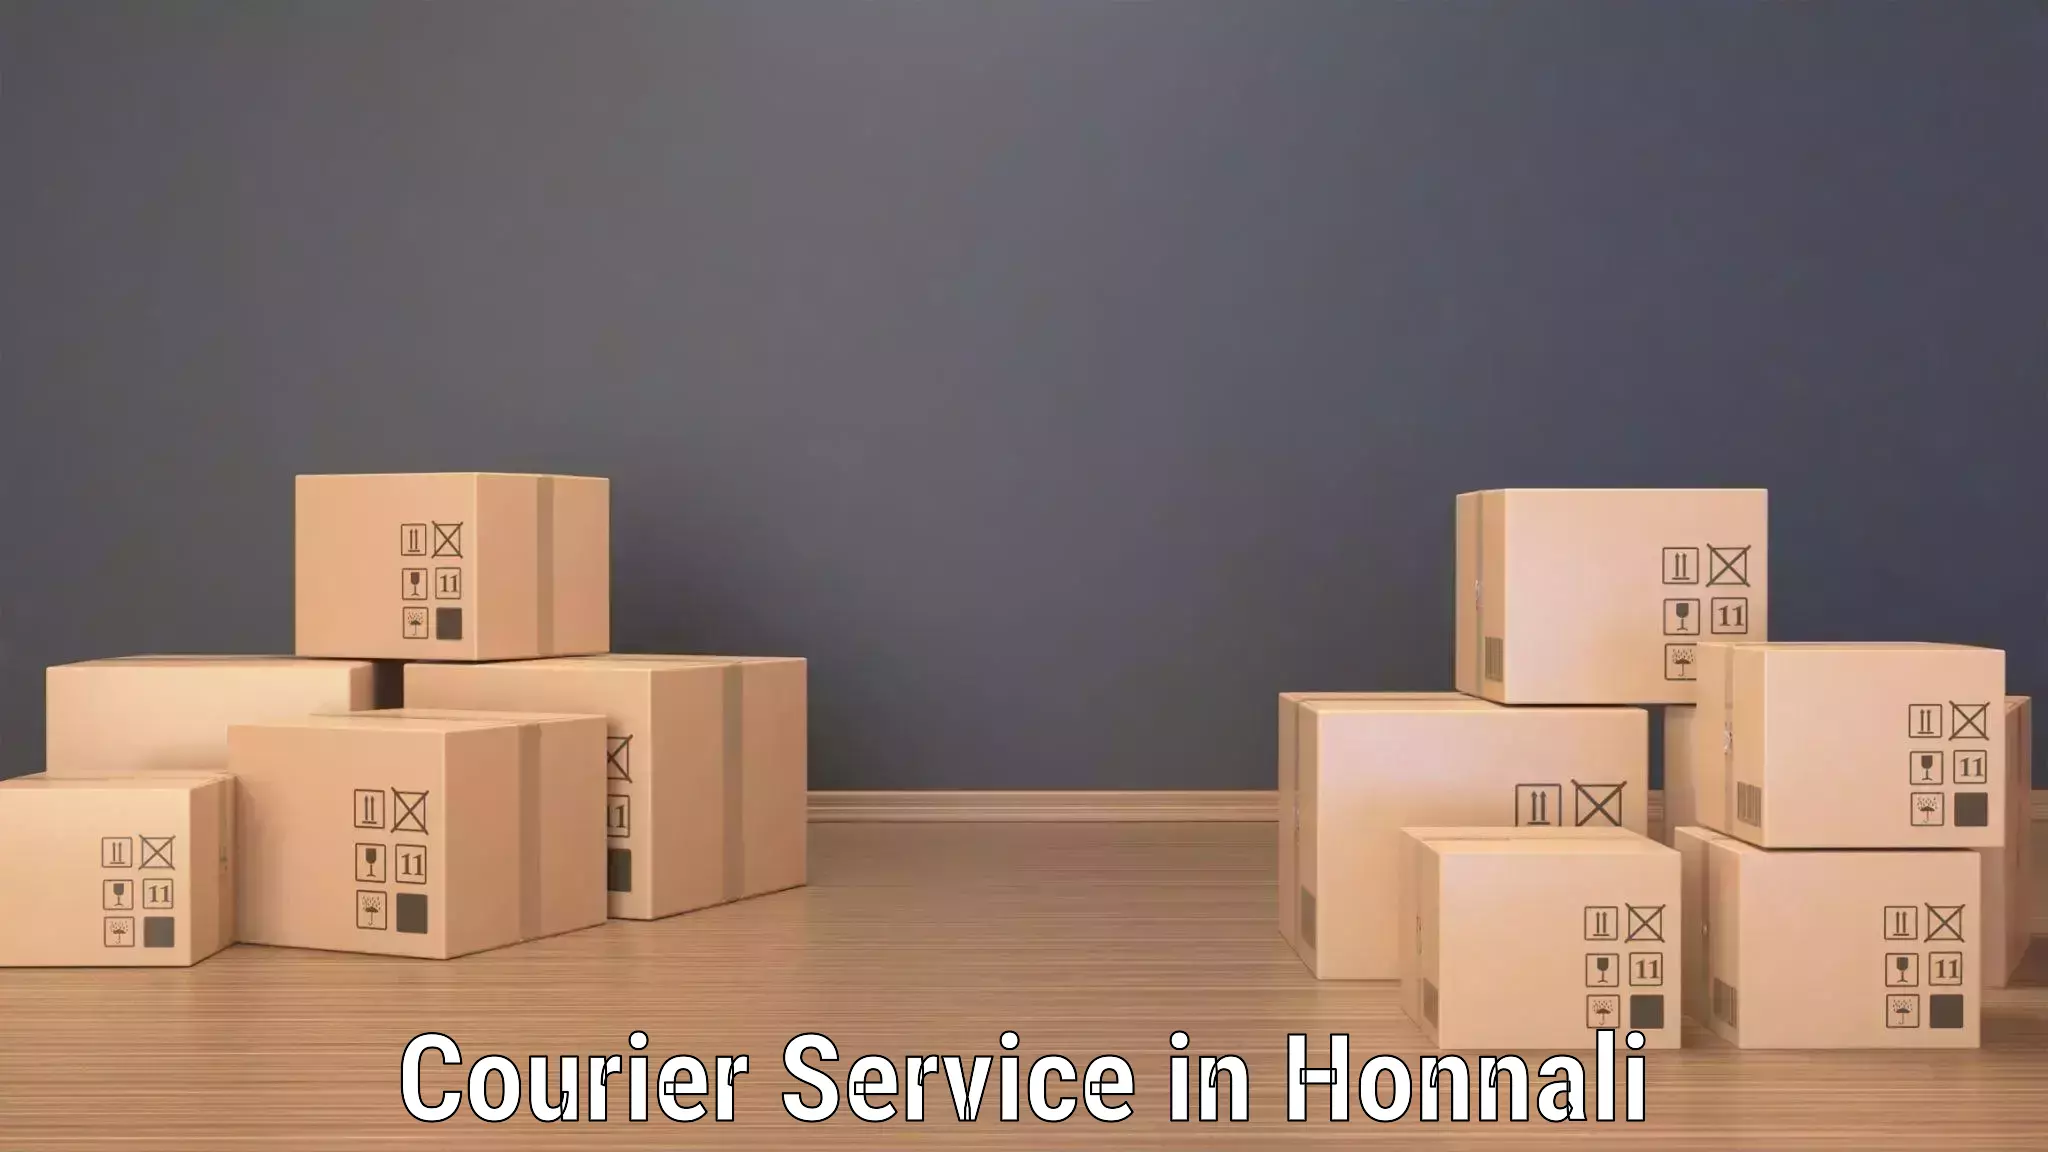 Streamlined delivery processes in Honnali